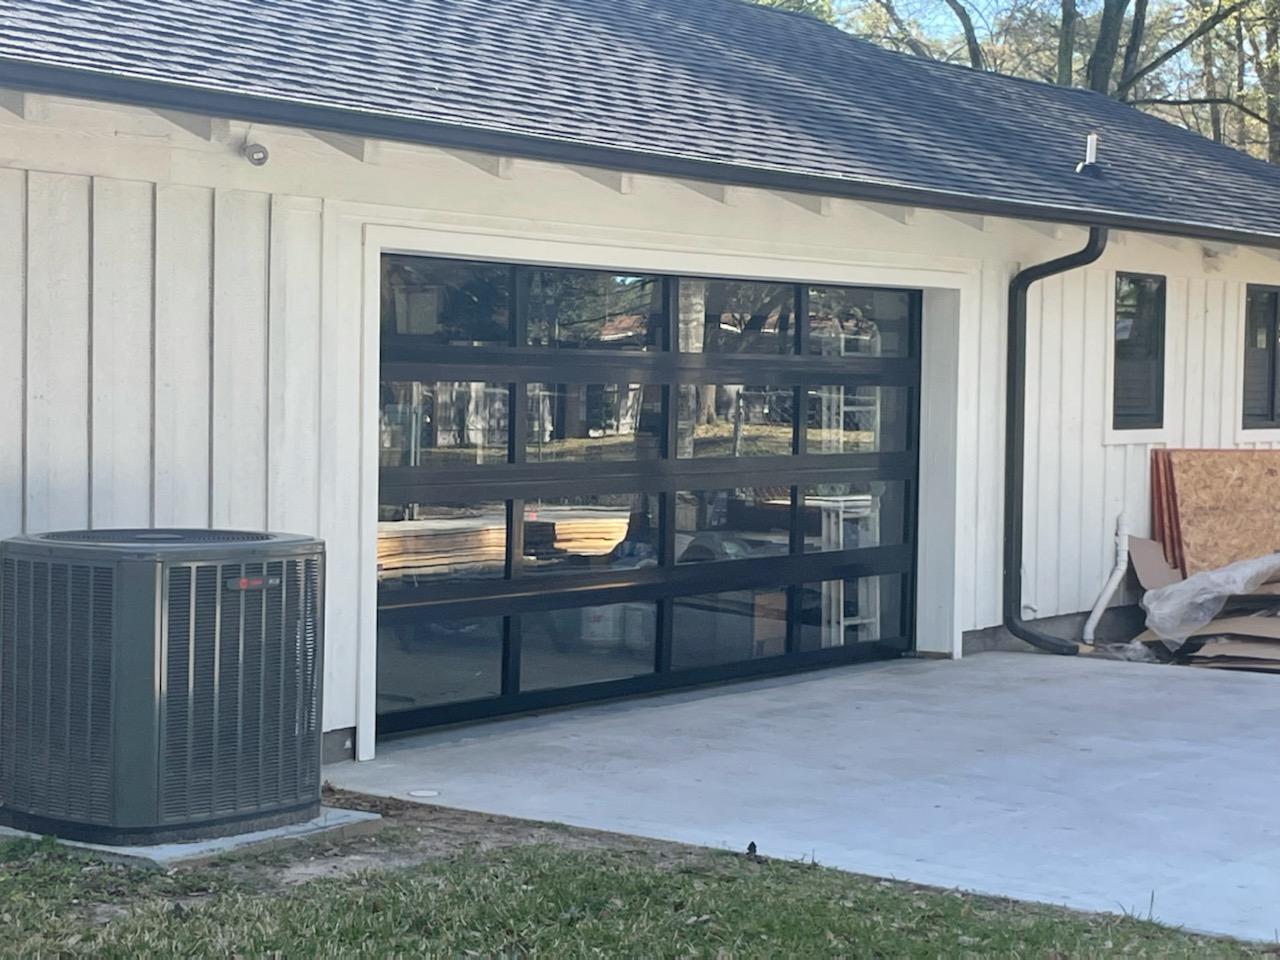 14 FT Wide By 10 FT Tall Full View Garage Door Matt Black Finish With Clear Glass